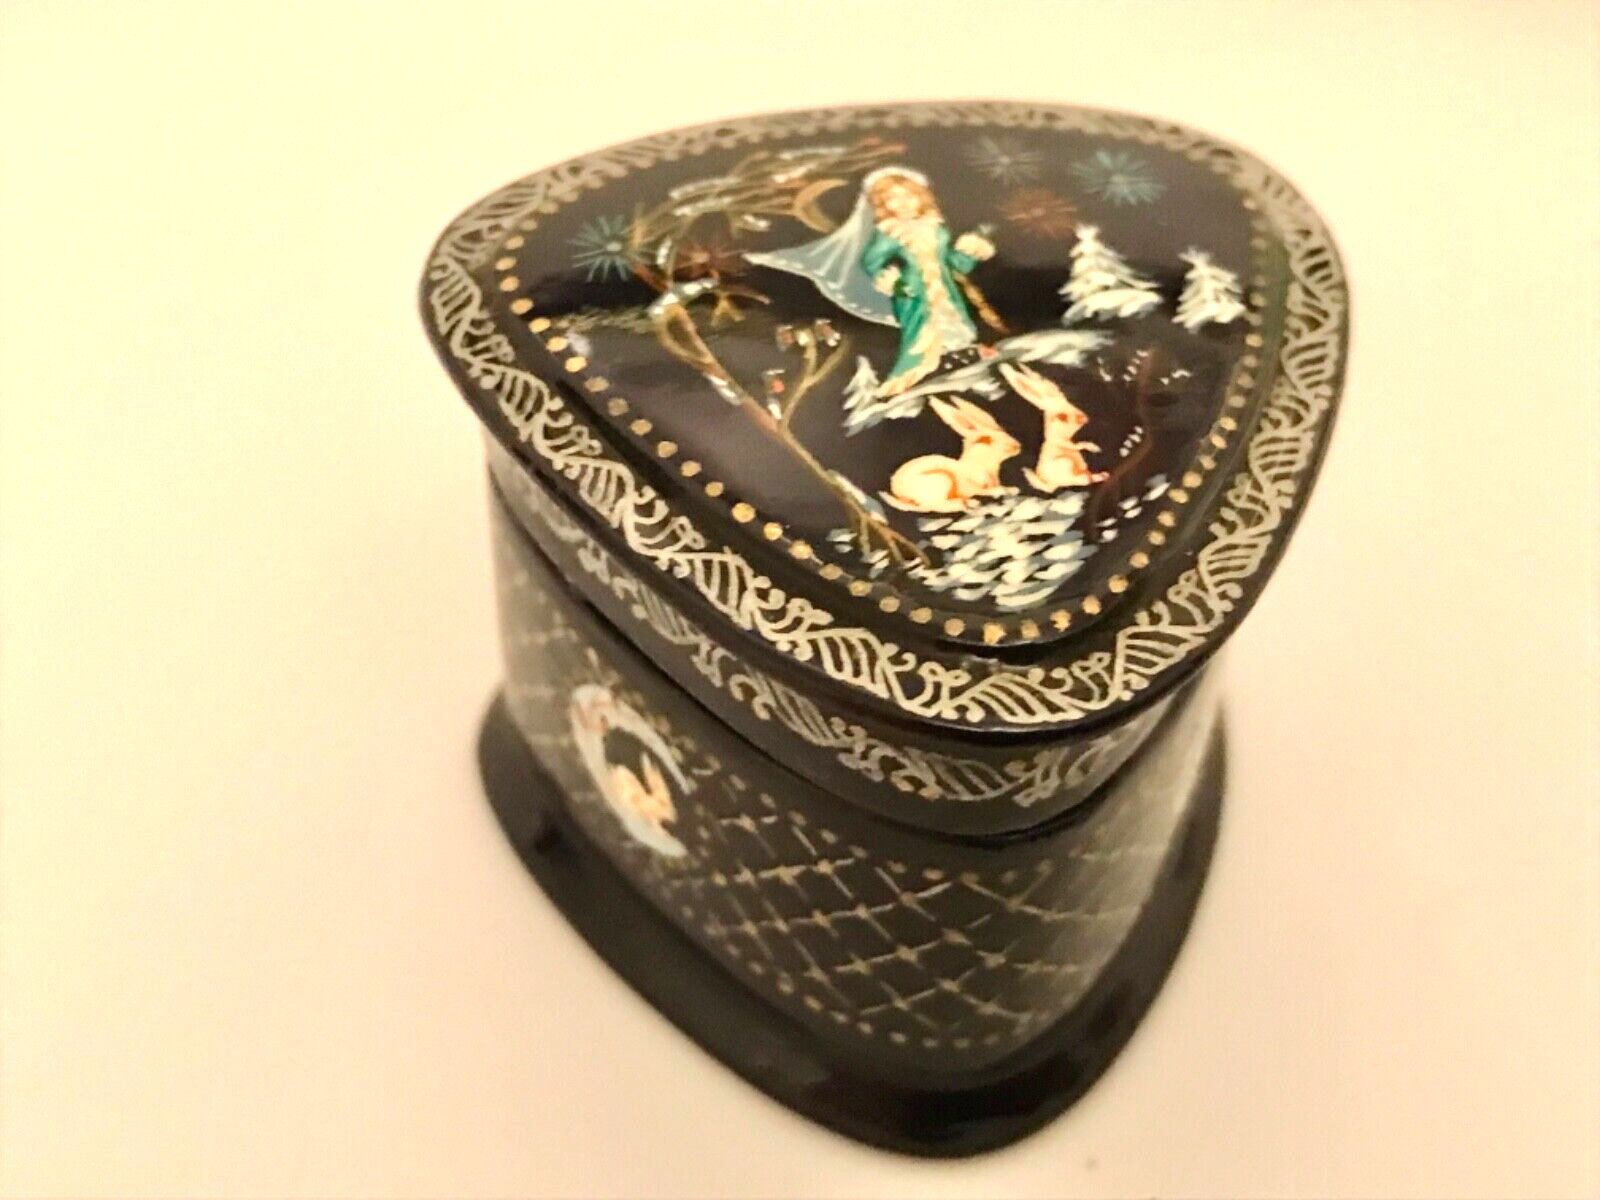 🔥LOOK🔥 NEW GENUINE KHOLUI SNOW MAIDEN RUSSIAN LACQUER BOX HAND PAINTED SIGNED